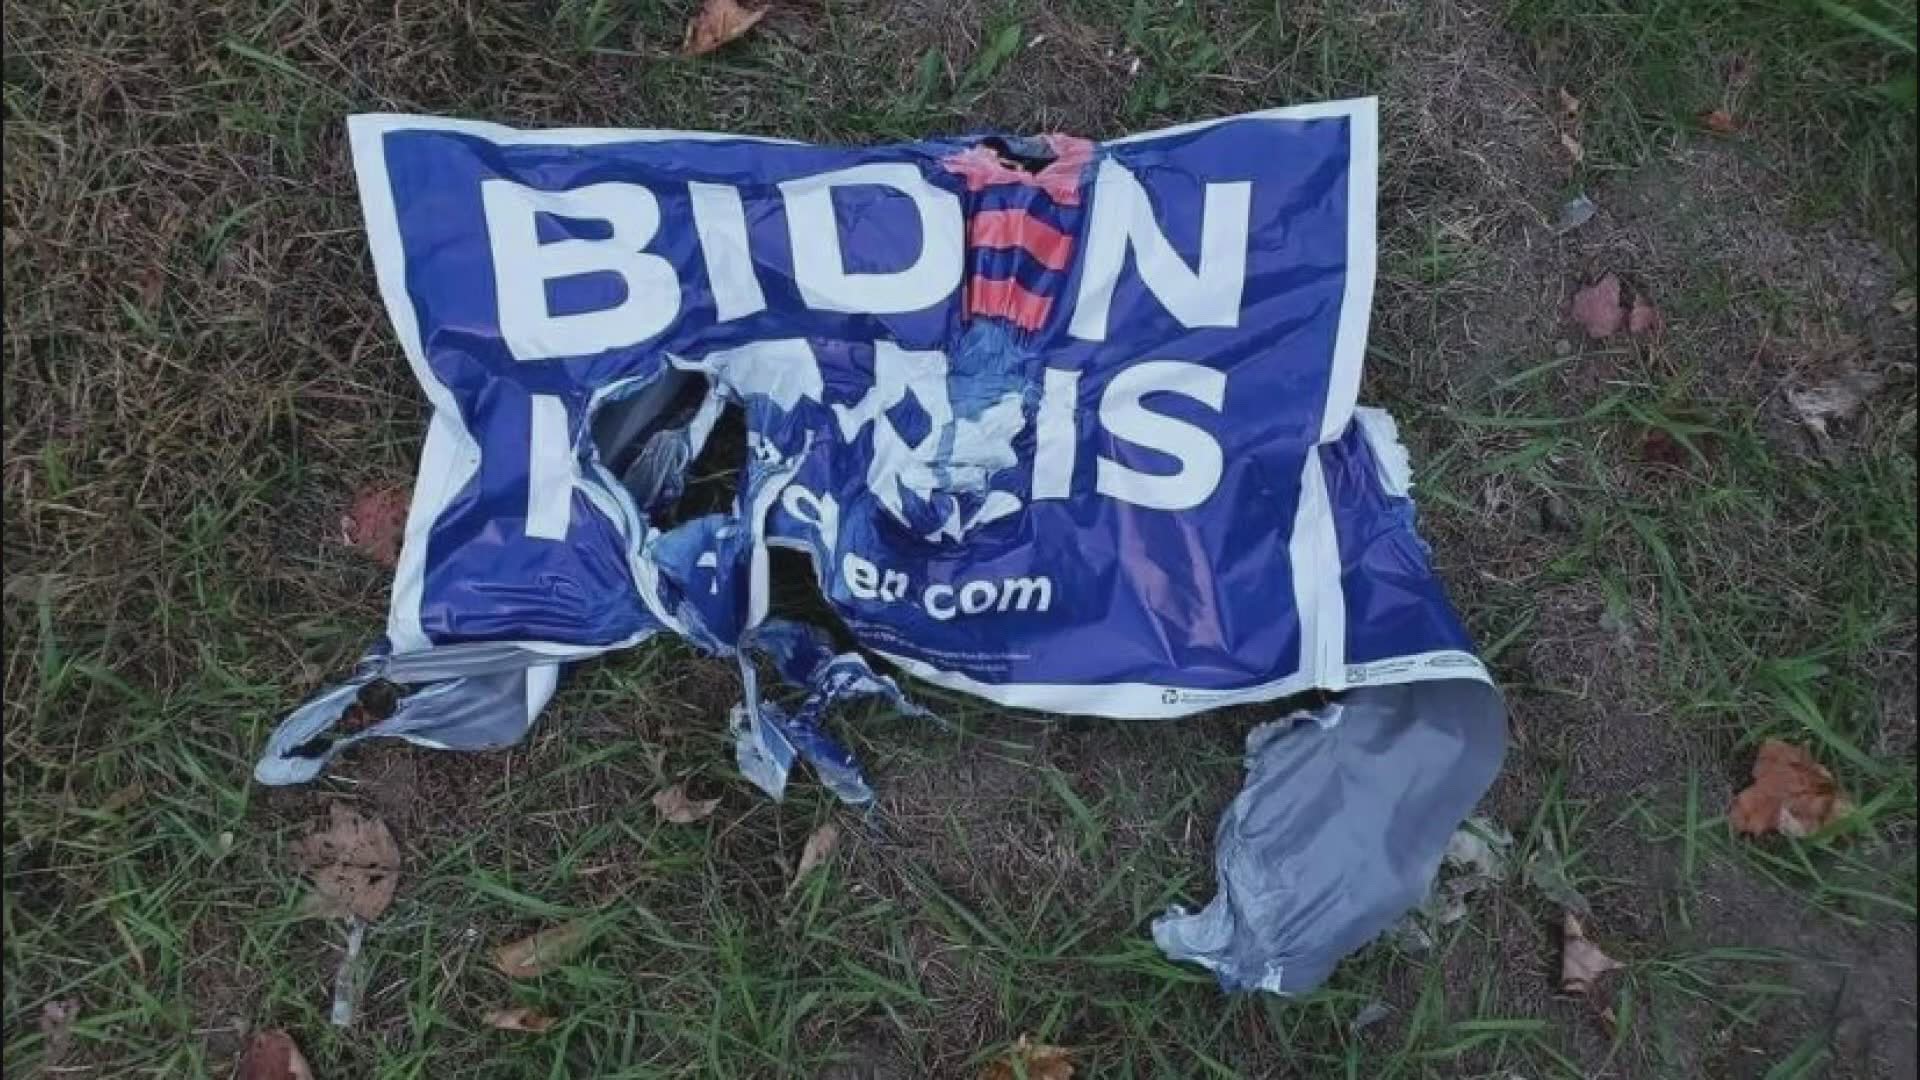 Both Republican and Democratic political signs around Maine are being stolen or vandalized.